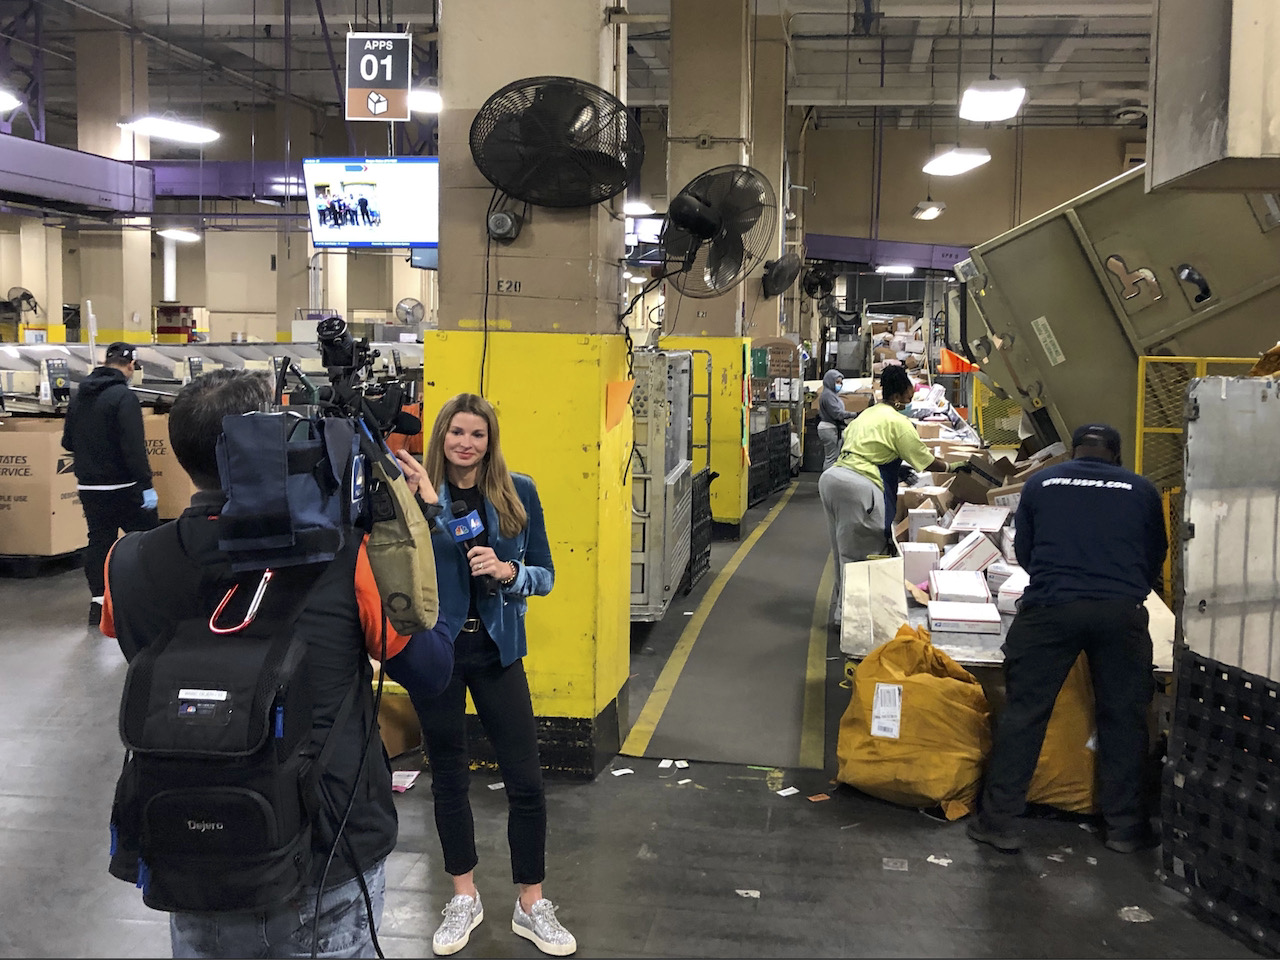 Jen anchoring in the field at a shipping warehouse, surrounded by workers and package bins, in jeans in a blue shaded velvet blazer.